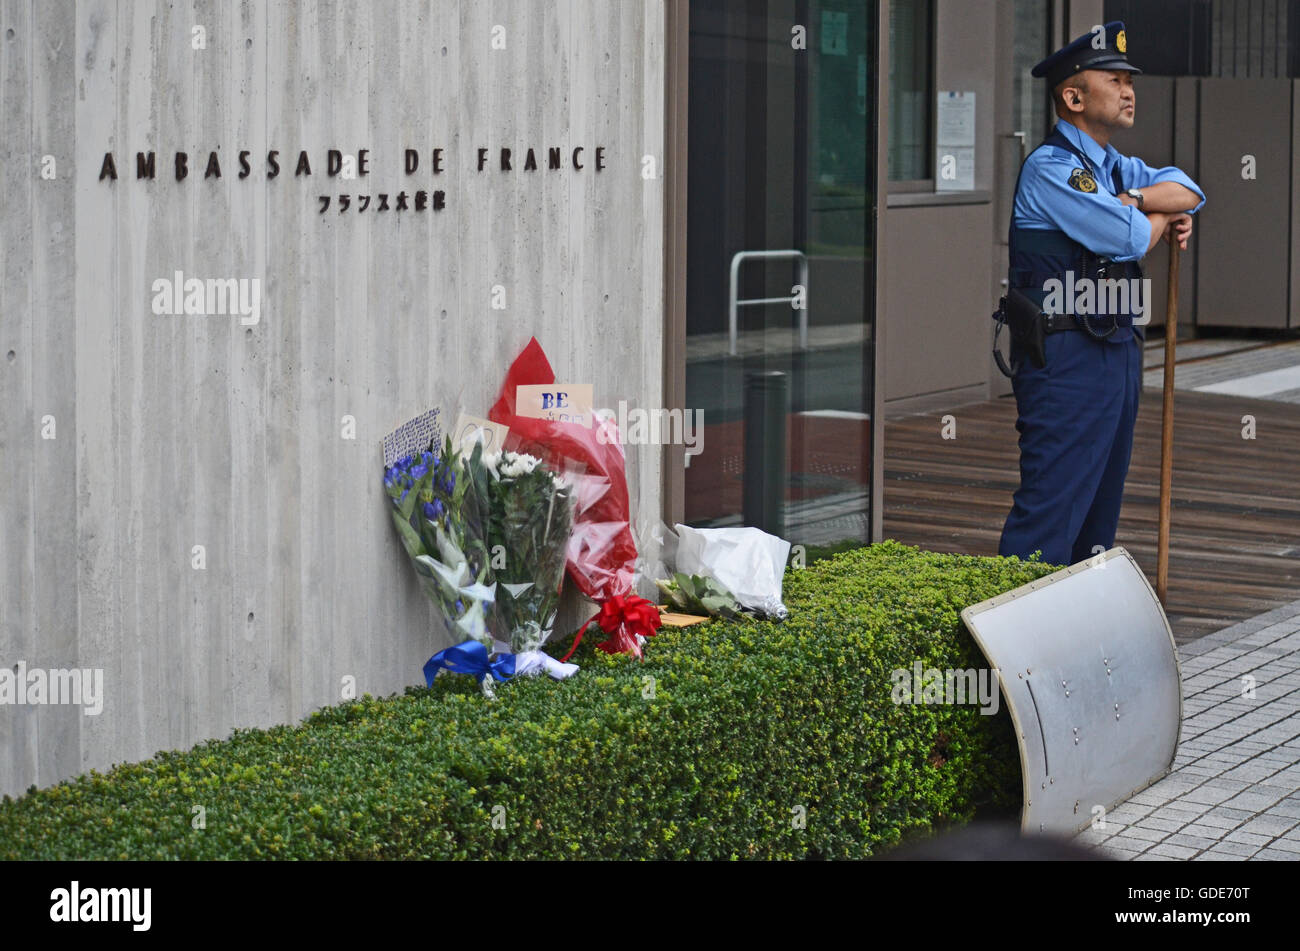 Tokyo, Japan. 16th July, 2016. A policeman stands guard at the French Embassy in Tokyo Japan days after the Terrorist attack in which a man used a 20-ton truck to plow down hundreds of people in Nice France, killing 84. July 16, 2016. Credit:  Ramiro Agustin Vargas Tabares/ZUMA Wire/Alamy Live News Stock Photo